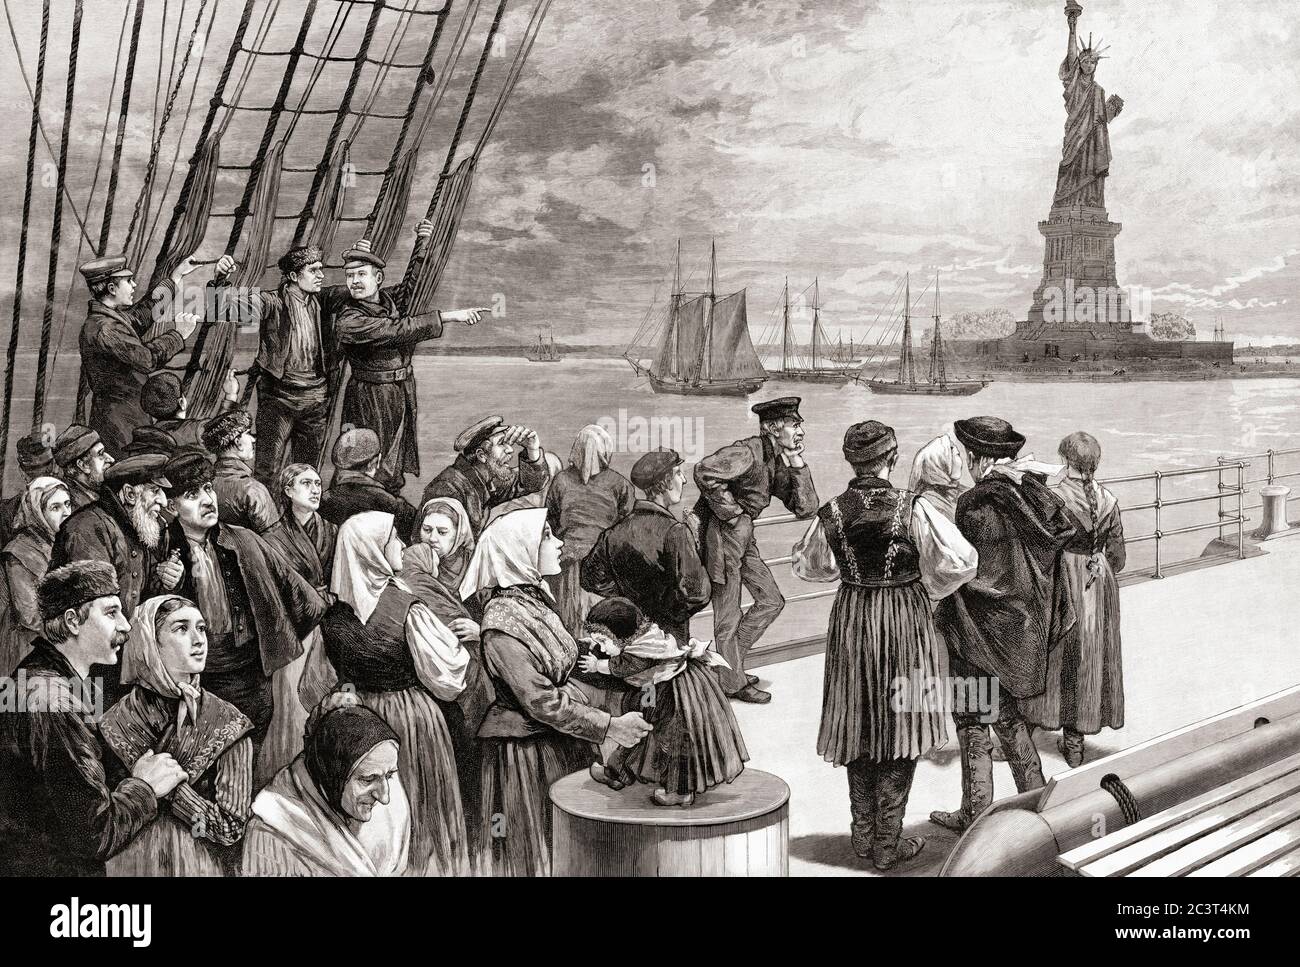 A ship with immigrant passengers of many nationalities passing the Statue of Liberty on Liberty Island in New York harbour, United States of America.  After an illustration by an unknown artist in Frank Leslie's illustrated newspaper, July, 1887. Stock Photo